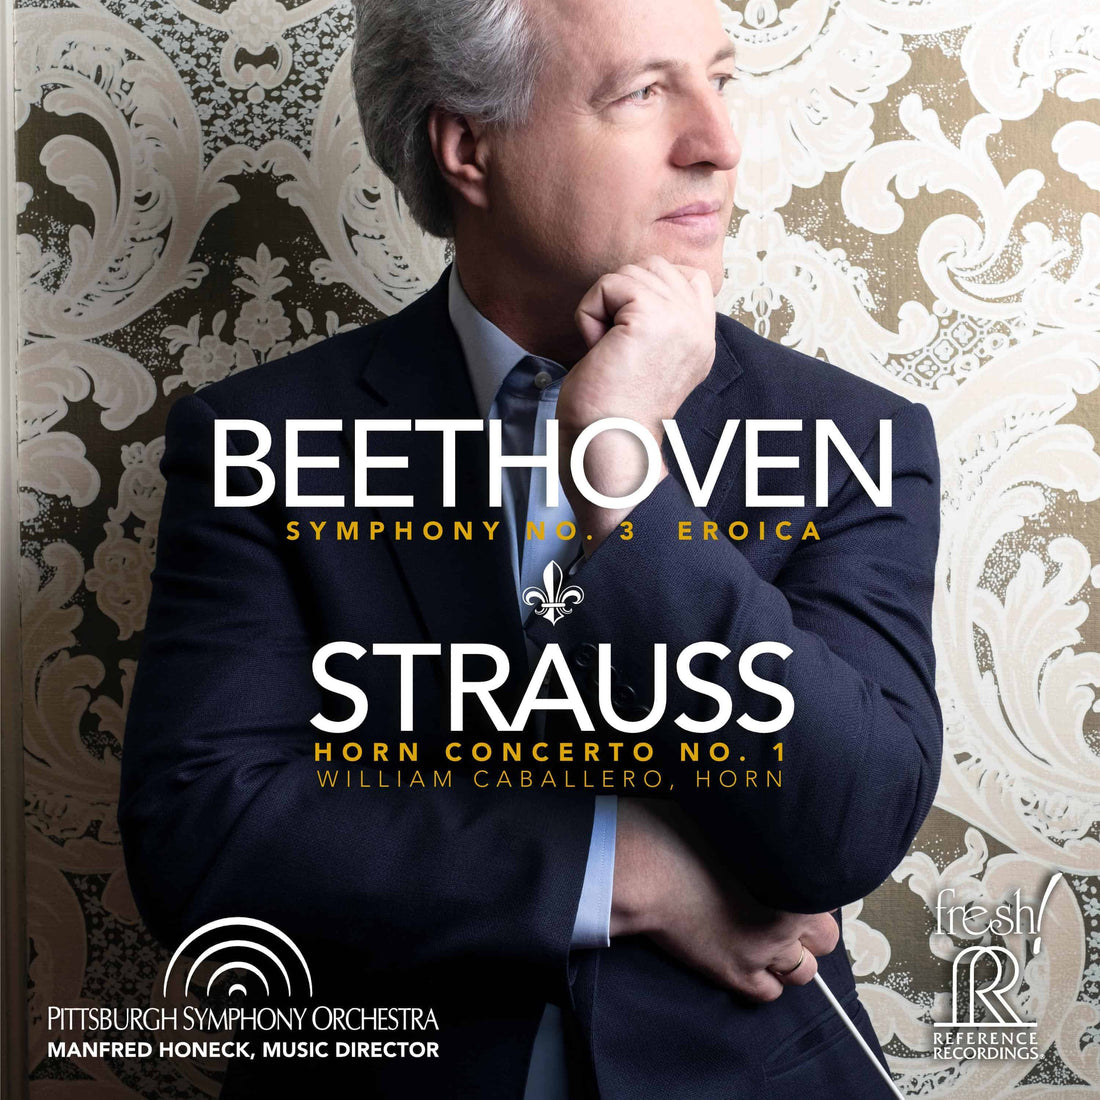 Beethoven &amp; Strauss | Symphony No 3 “Eroica” &amp; Horn Concerto No. 1 [SACD]